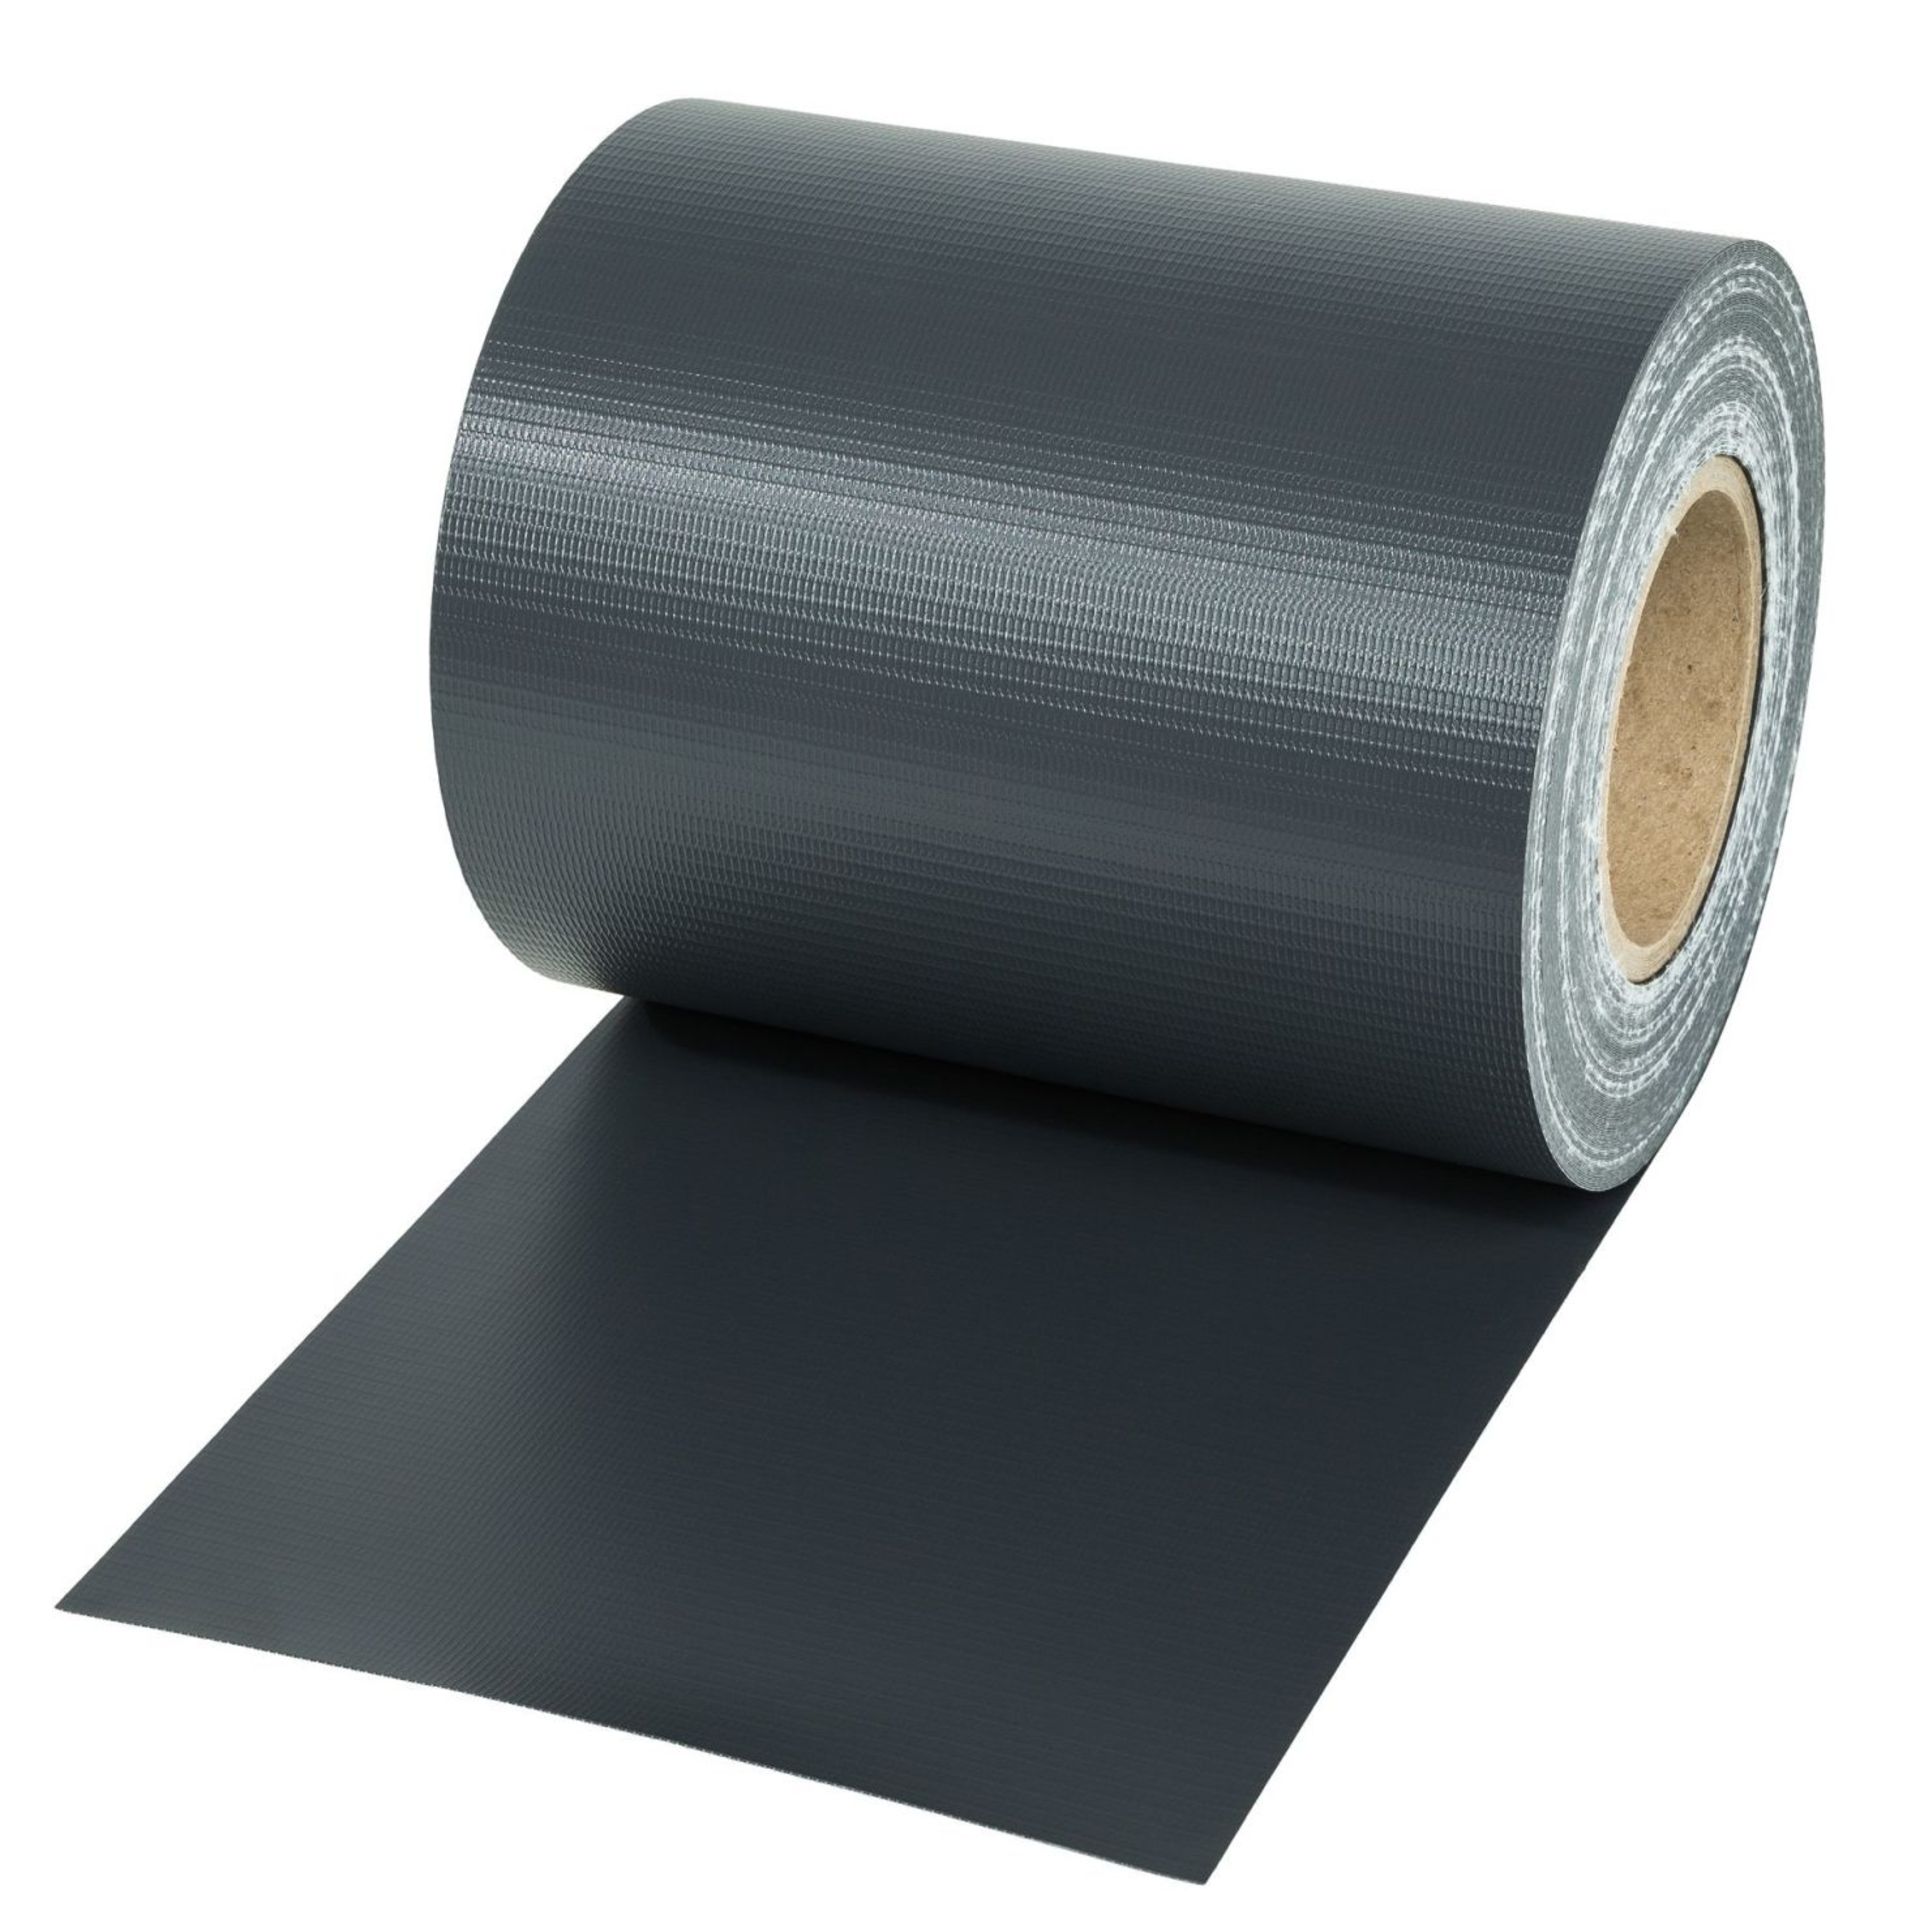 Tectake - Pvc Privacy Film Anthracite - Boxed. RRP œ48.99 - Image 2 of 2